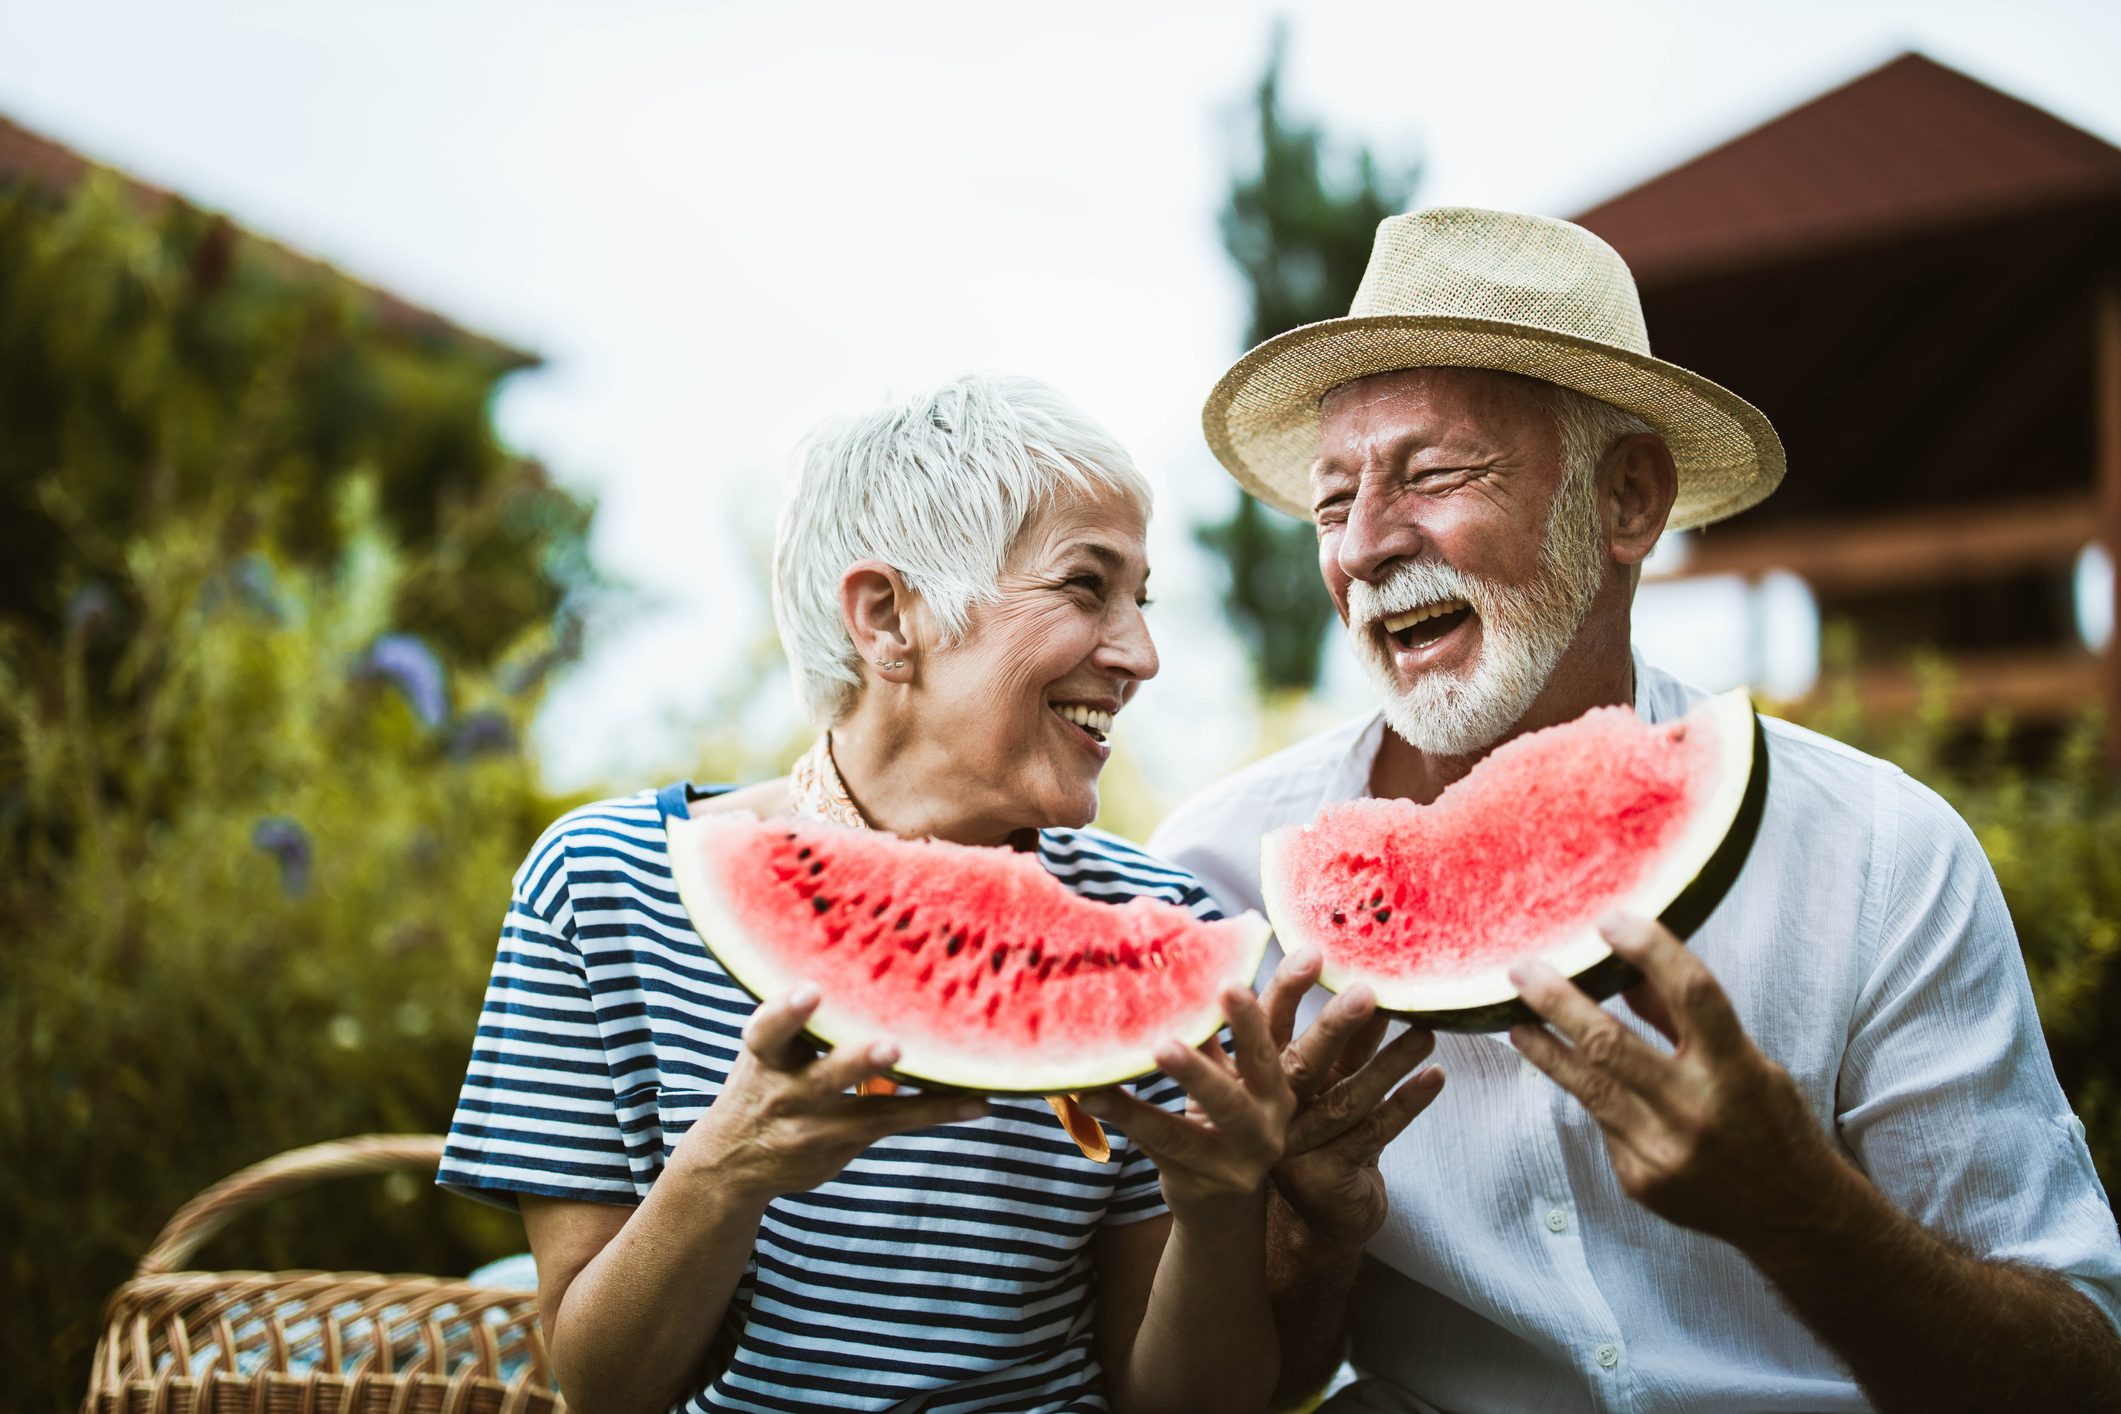 Cheerful mature couple having fun while eating watermelon during picnic day in nature.